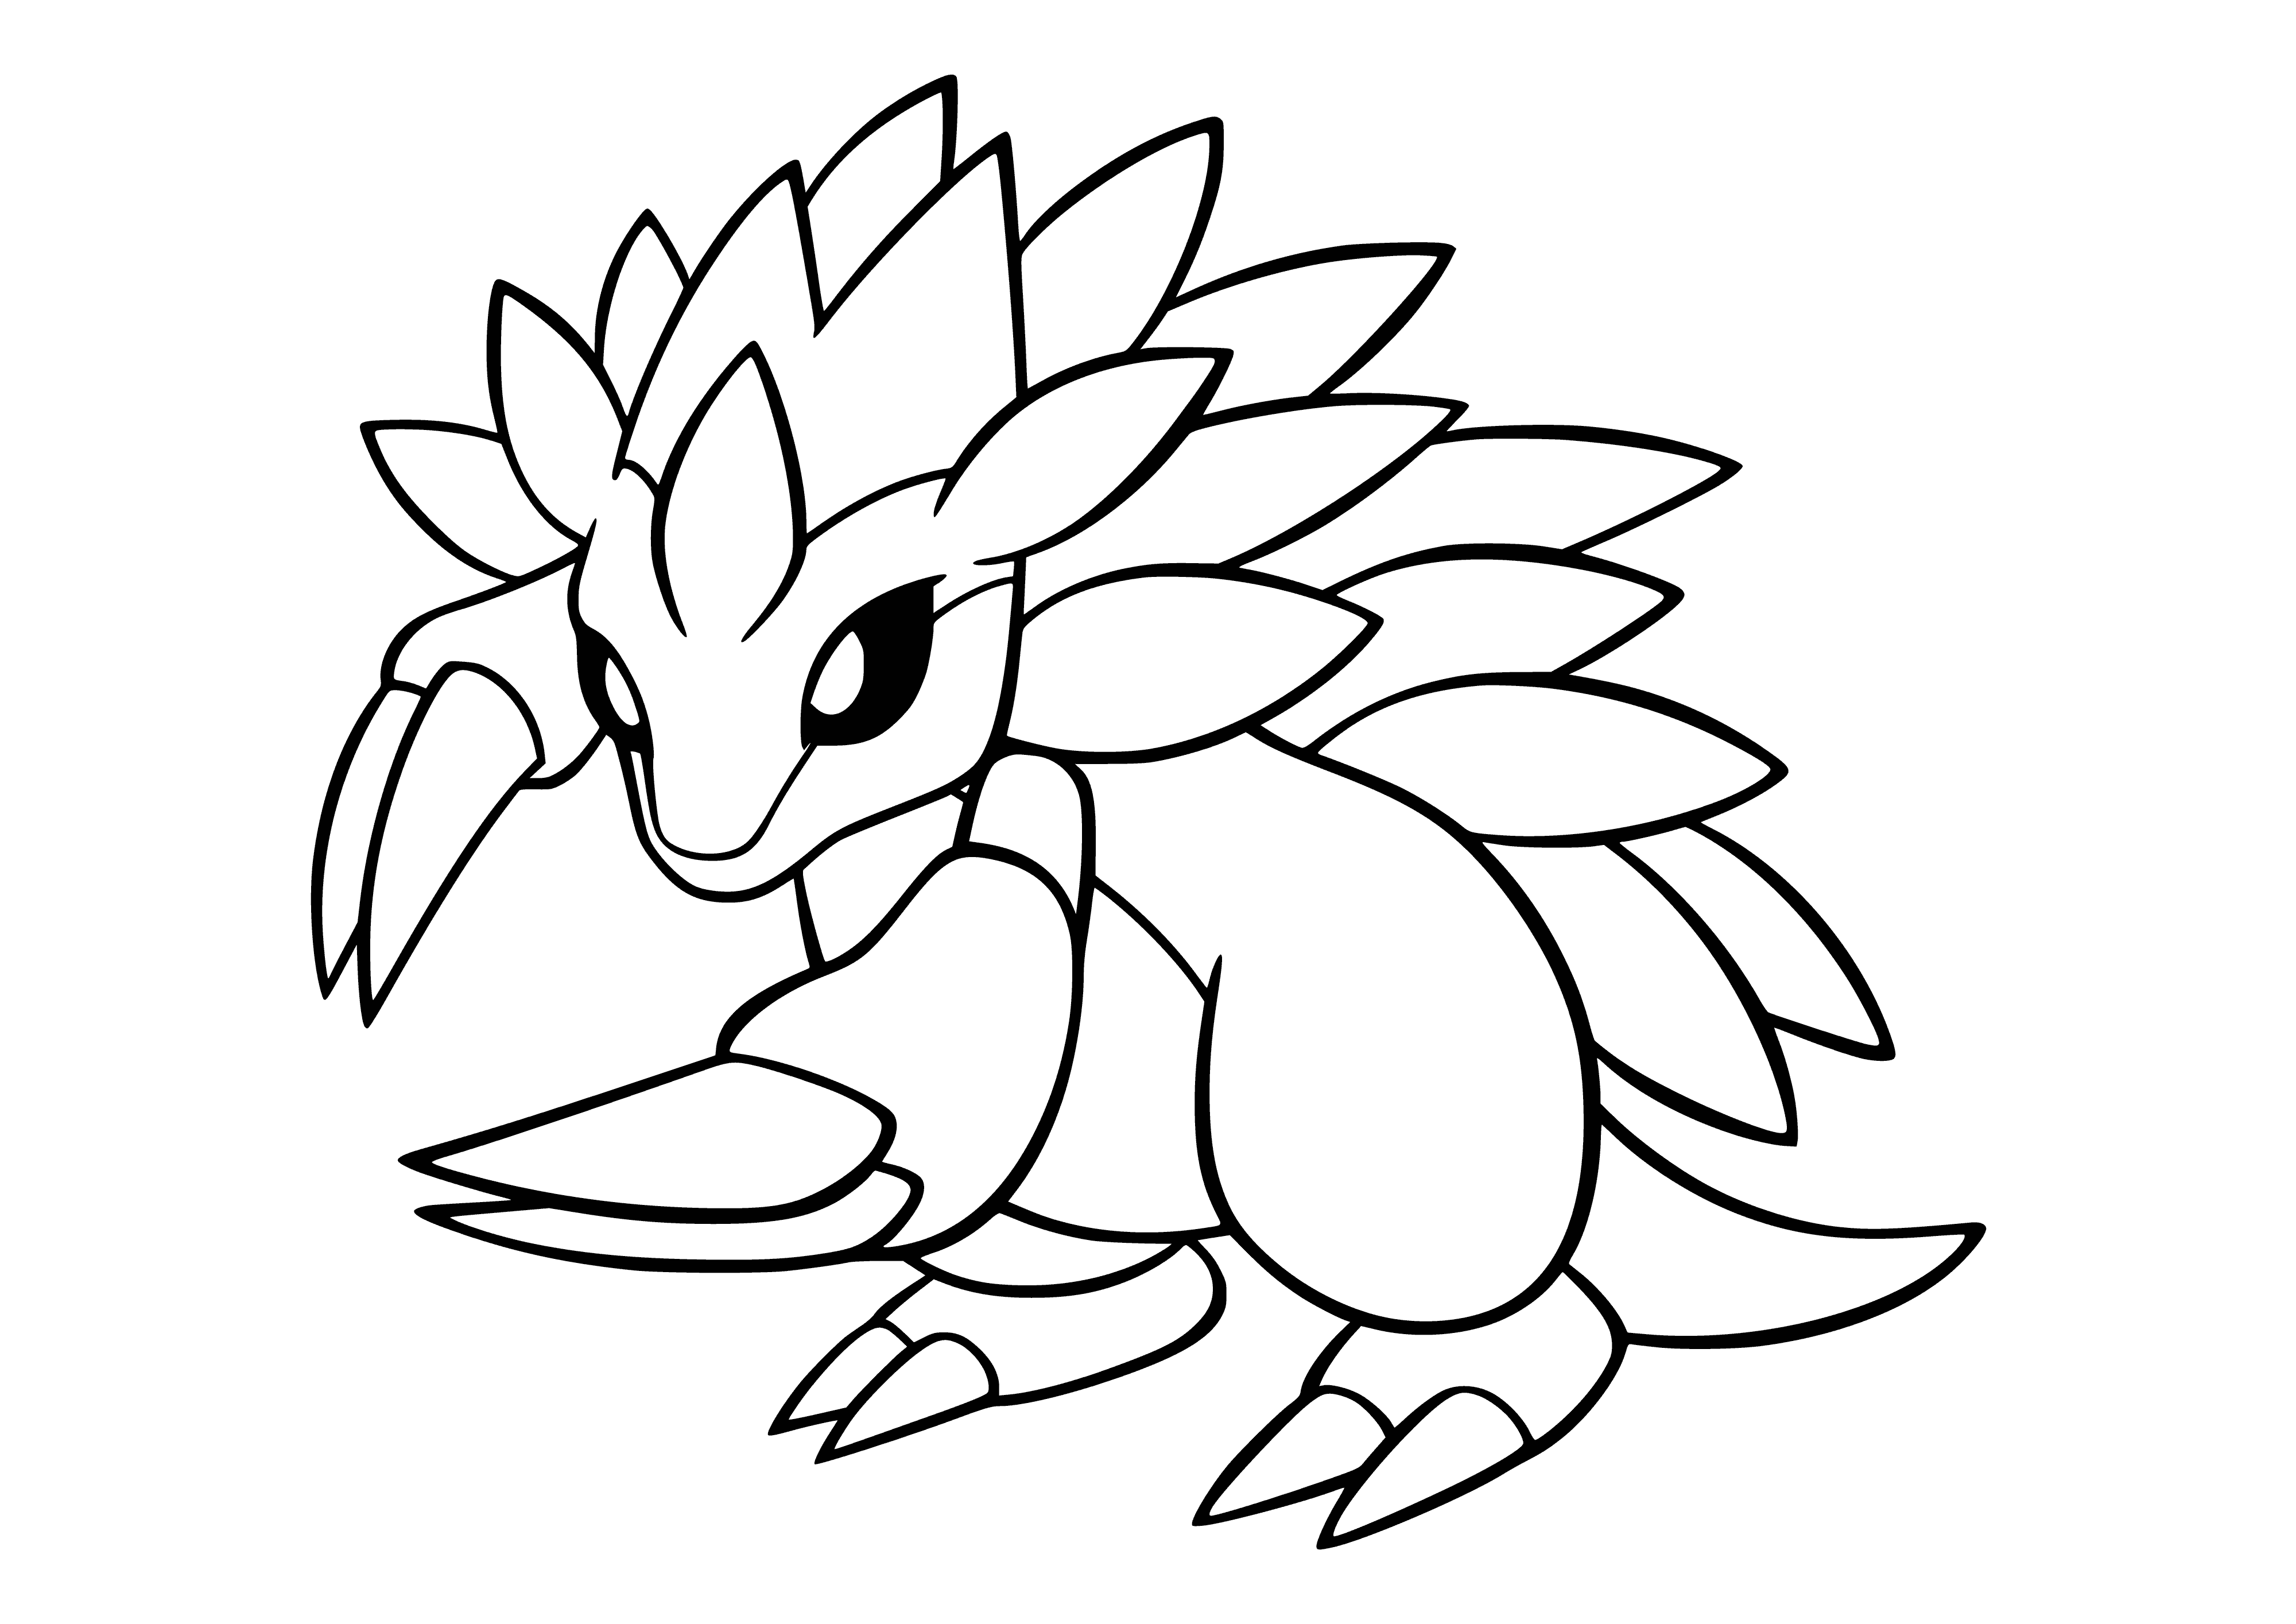 coloring page: Large, brown Pokemon w/ spike on back & 3 claws on each foot.